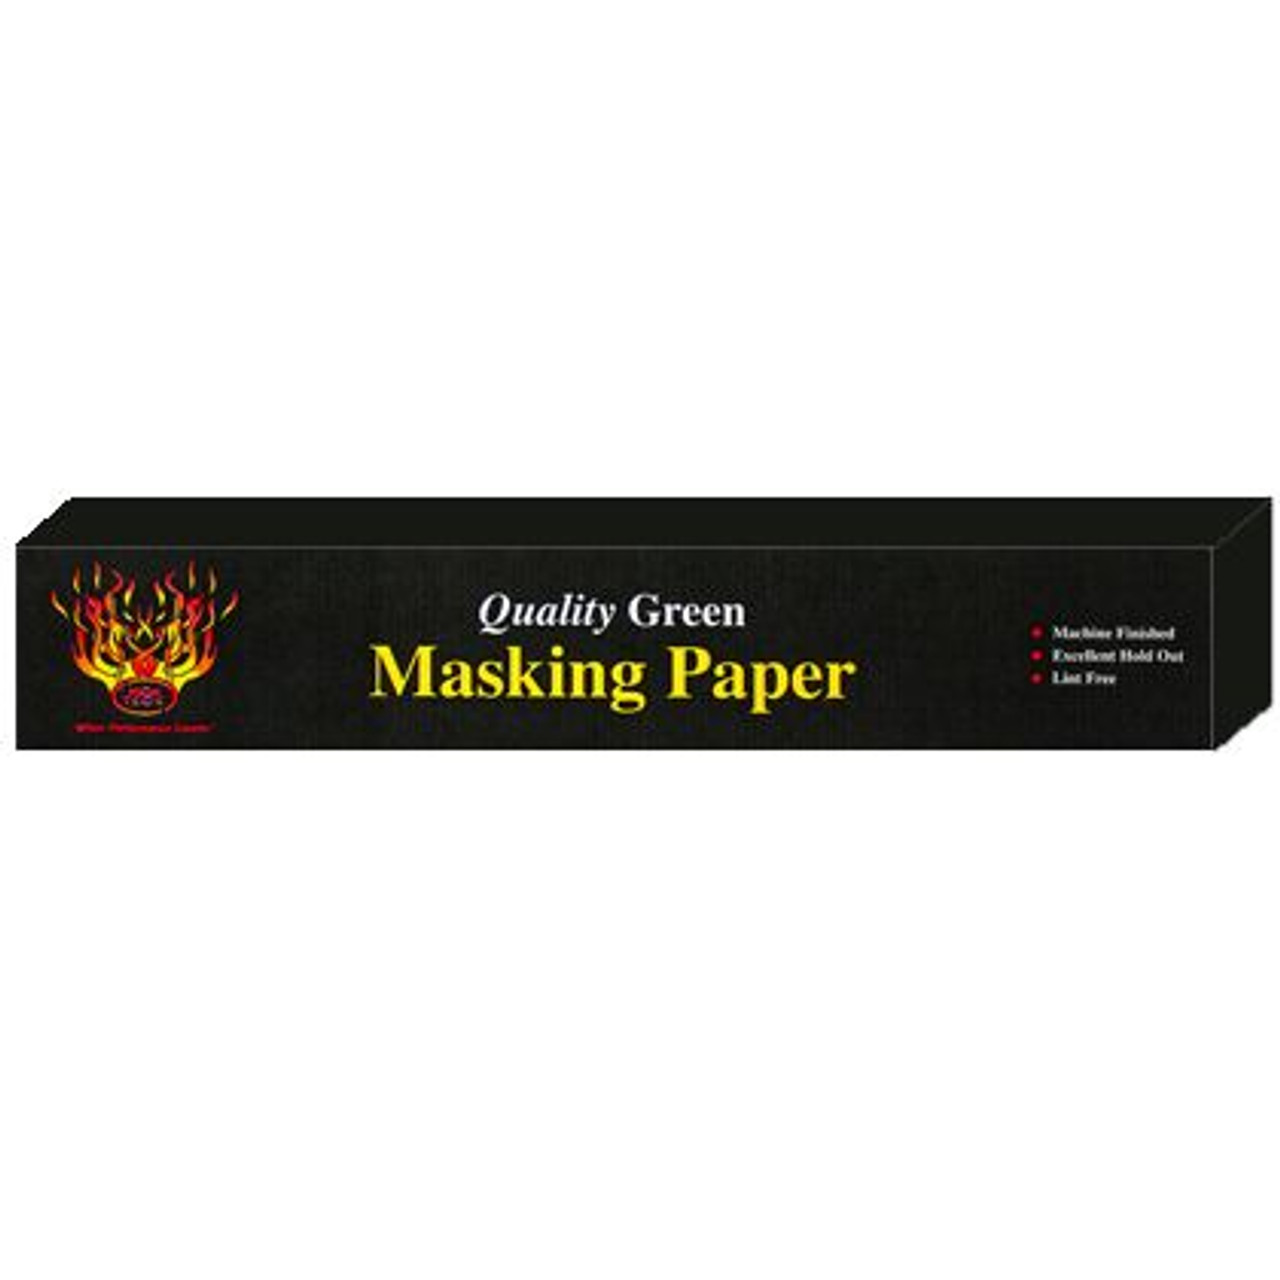 Quality Green Masking Paper, Weight: 35#, Size: 18" X 500'